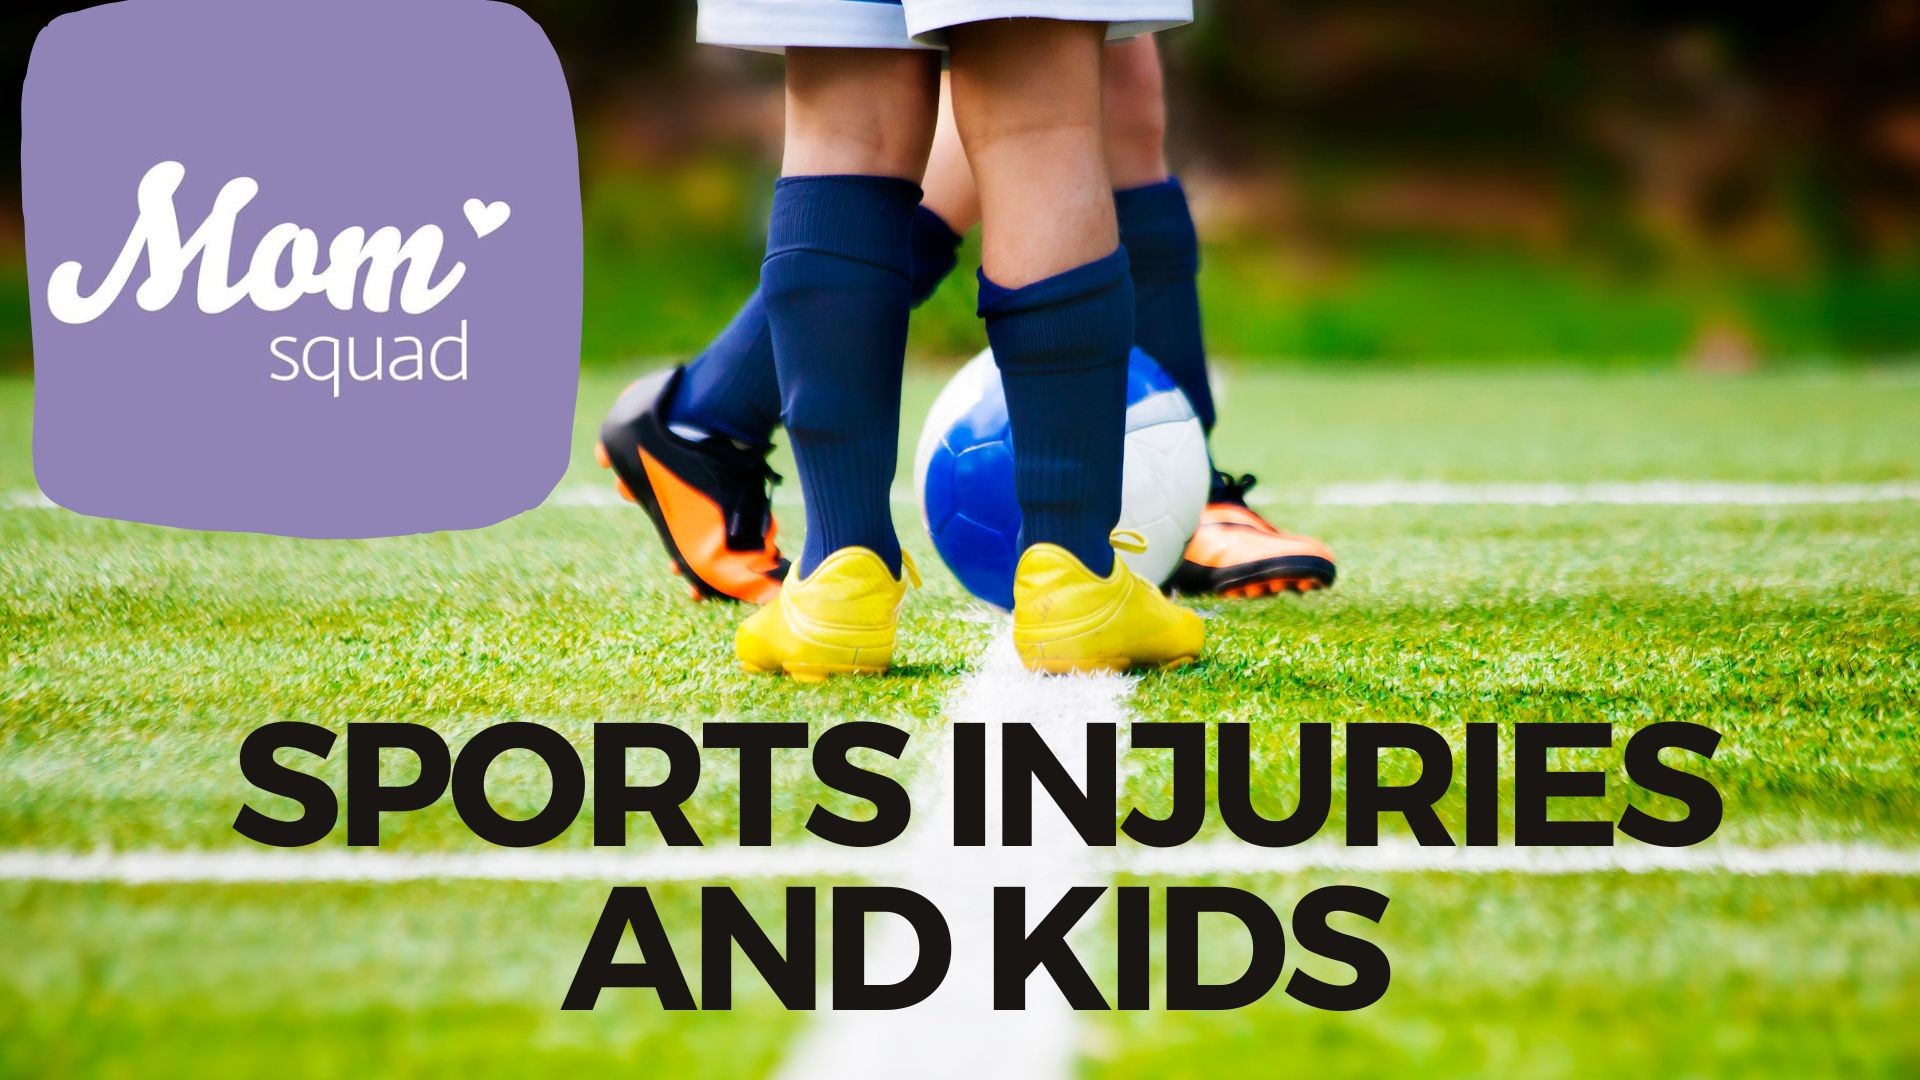 WKYC's Maureen Kyle looks into the increase in sports injuries in children, and speaks with a sports medicine specialist about how to prevent and treat injuries.